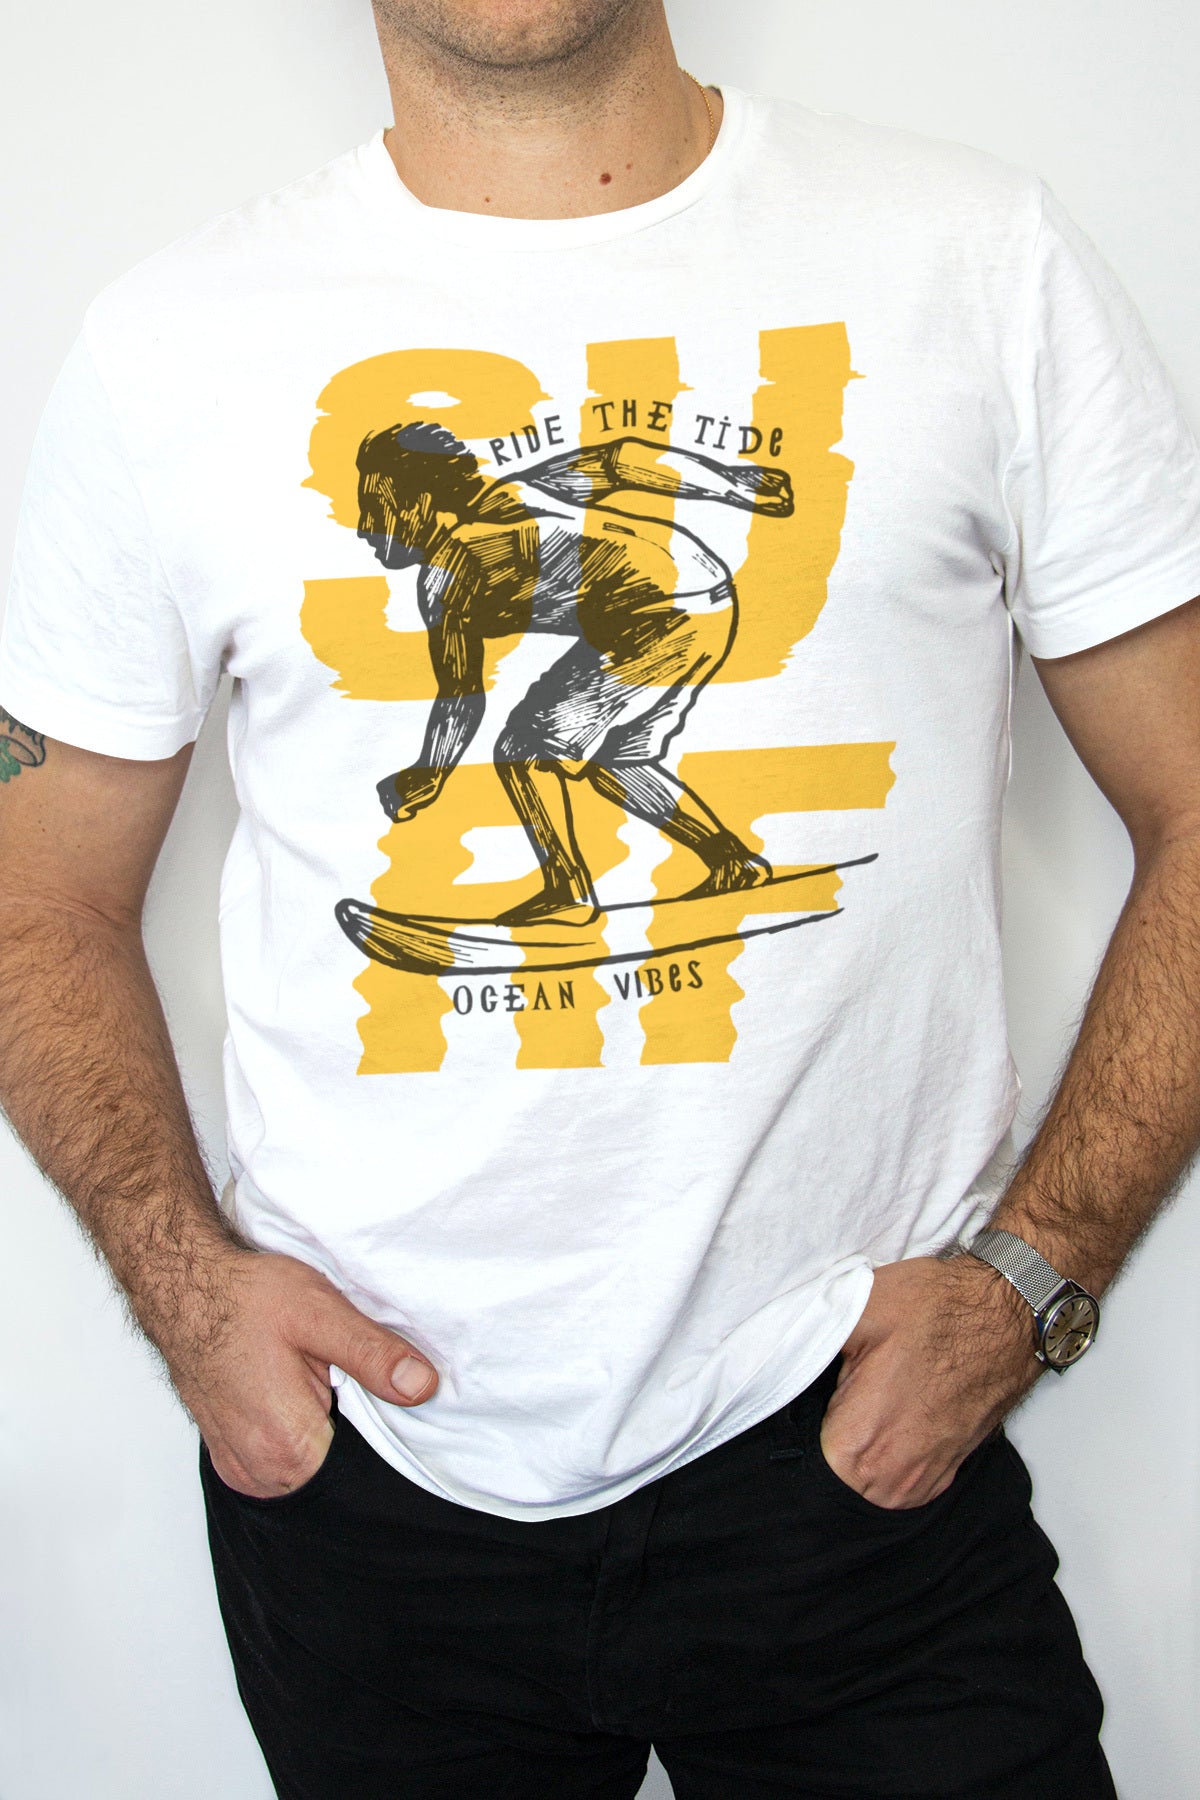 A man sporting an on-trend S U R F T-Shirt with a surfboard on it.